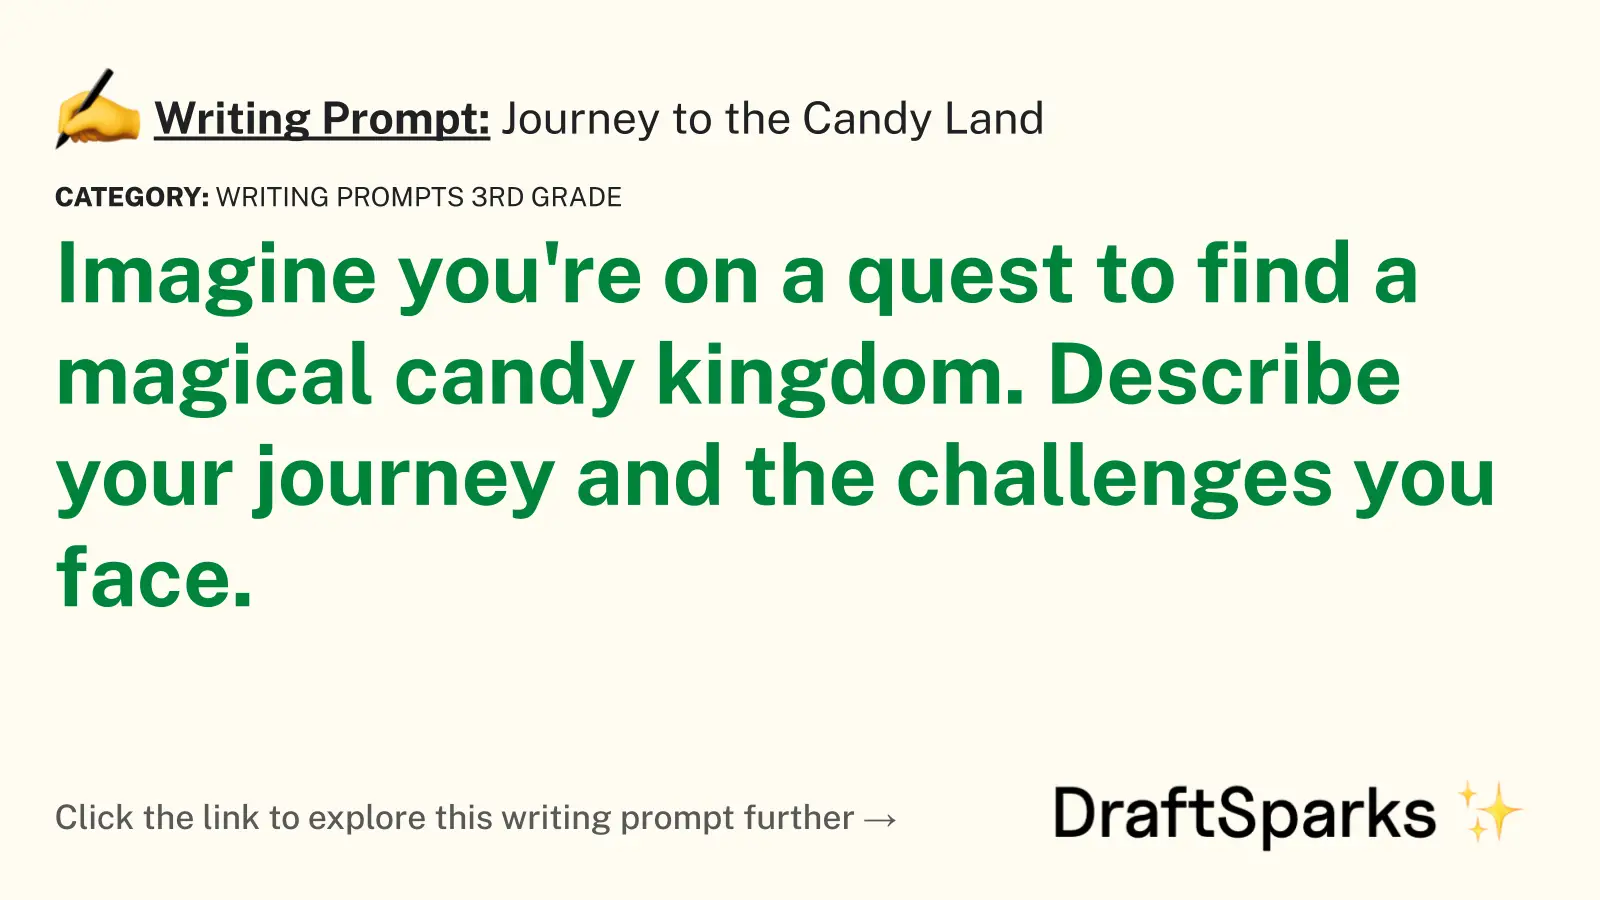 Journey to the Candy Land